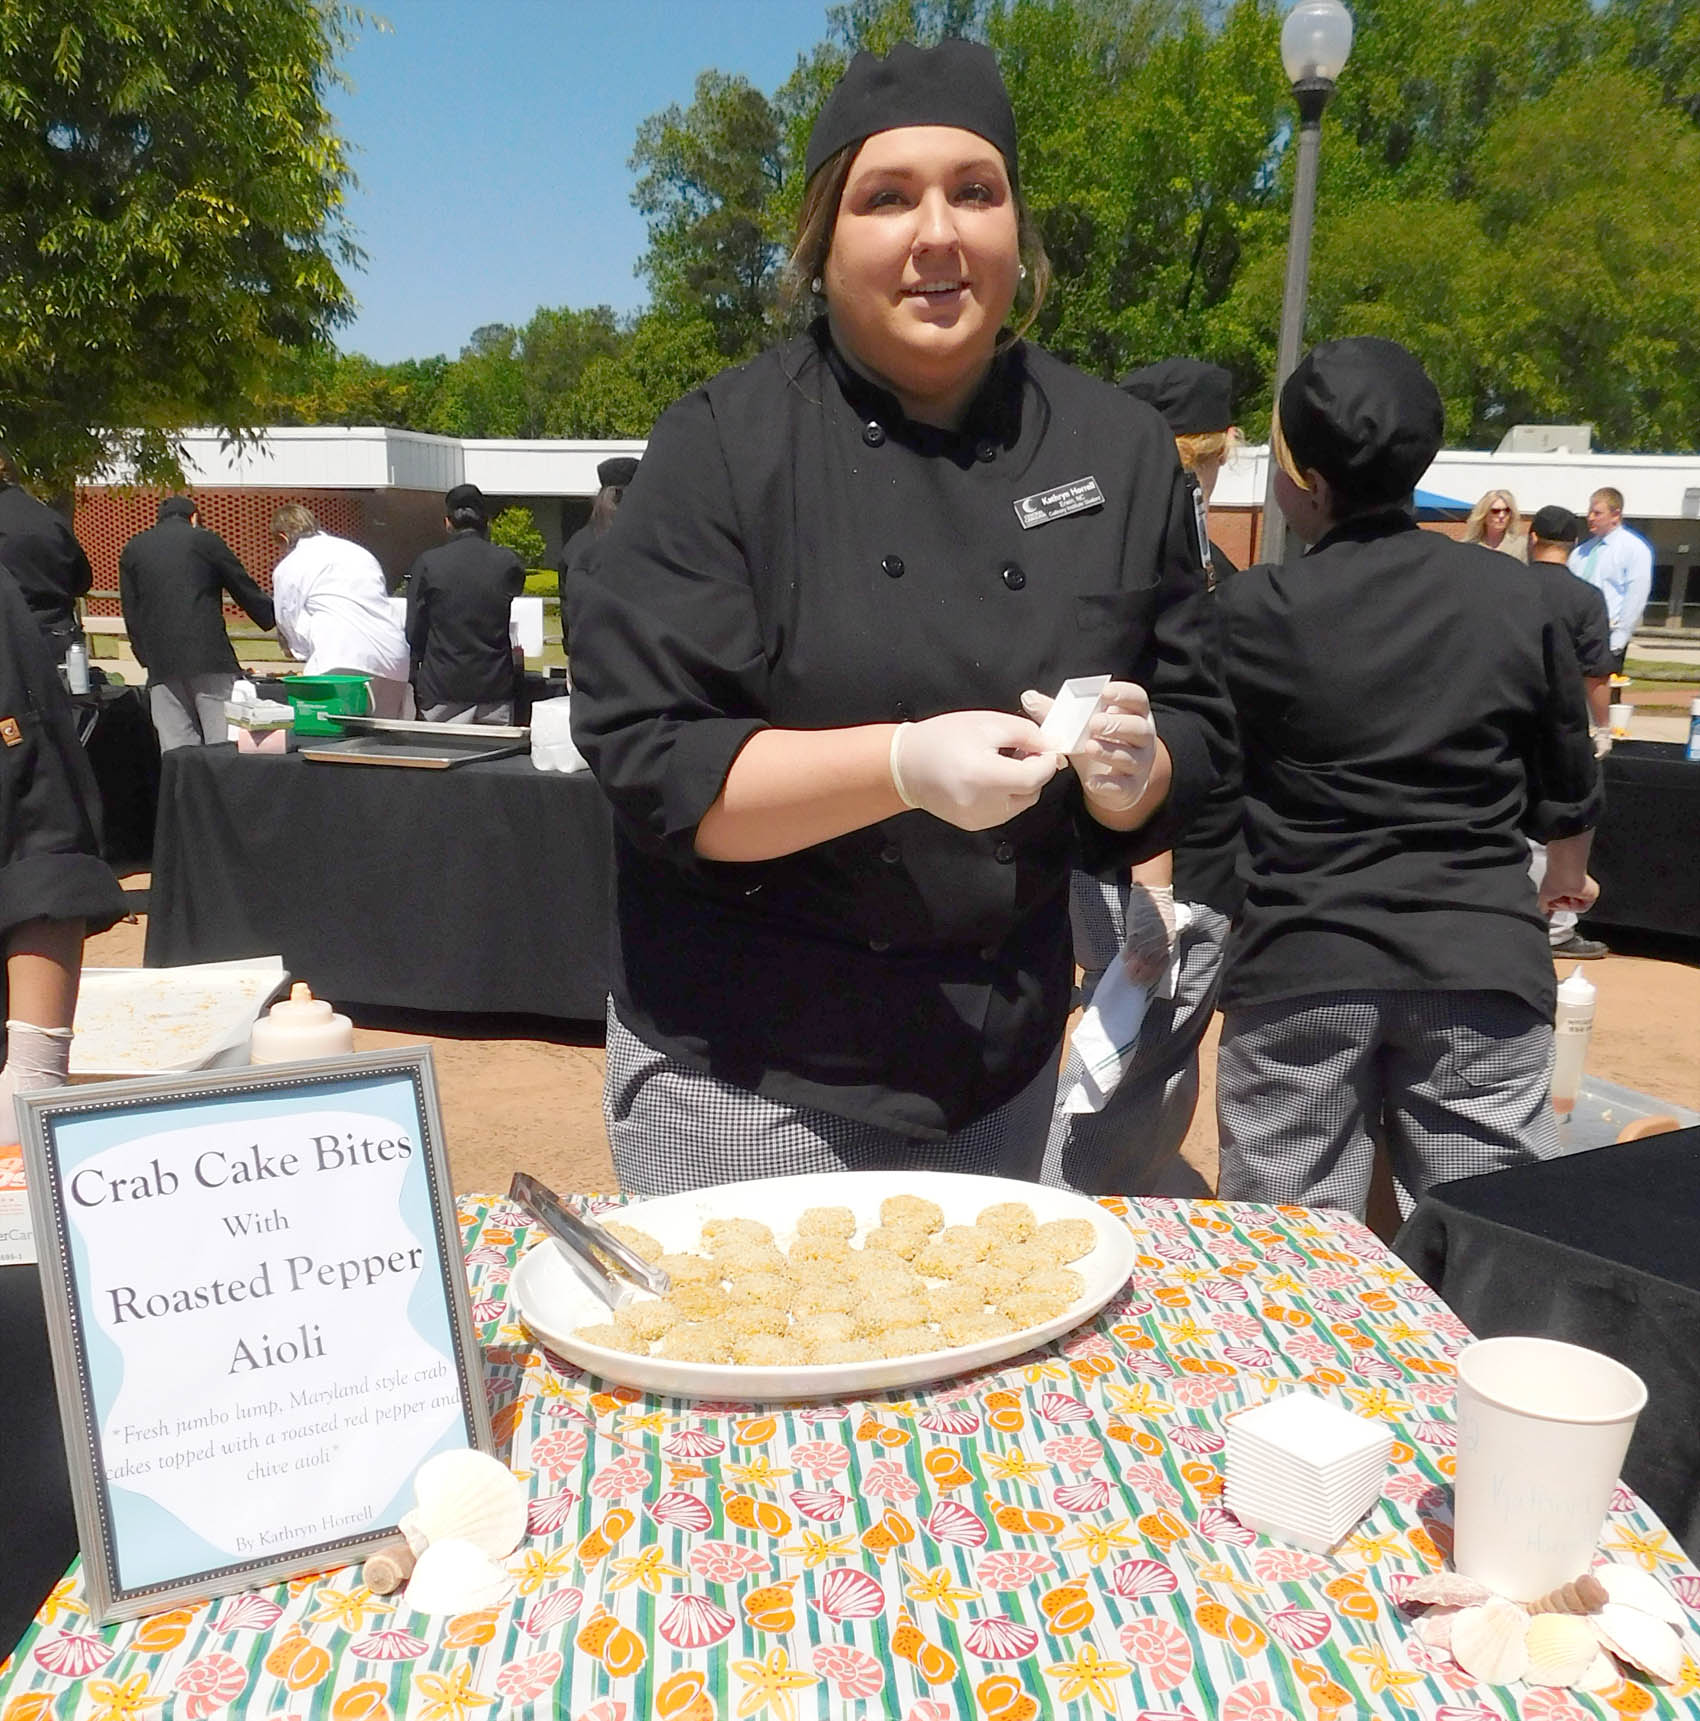 Click to enlarge,  Kathryn Horrell, of Erwin, with her Crab Cake Bites with Roasted Pepper-Chive Aioli, was the People's Choice Award winner at the Second Annual Central Carolina Community College Culinary Showcase. The event, featuring dishes by Culinary &amp; Hospitality Arts students represented from Chatham, Harnett, and Lee counties, was held April 26 on the CCCC Lee Main Campus. Special judges included WRAL's Brian Shrader (host of Local Dish) and Lisa Prince (Marketing Specialist for the North Carolina Department of Agriculture and Consumer Services and Host of Flavor, NC). 